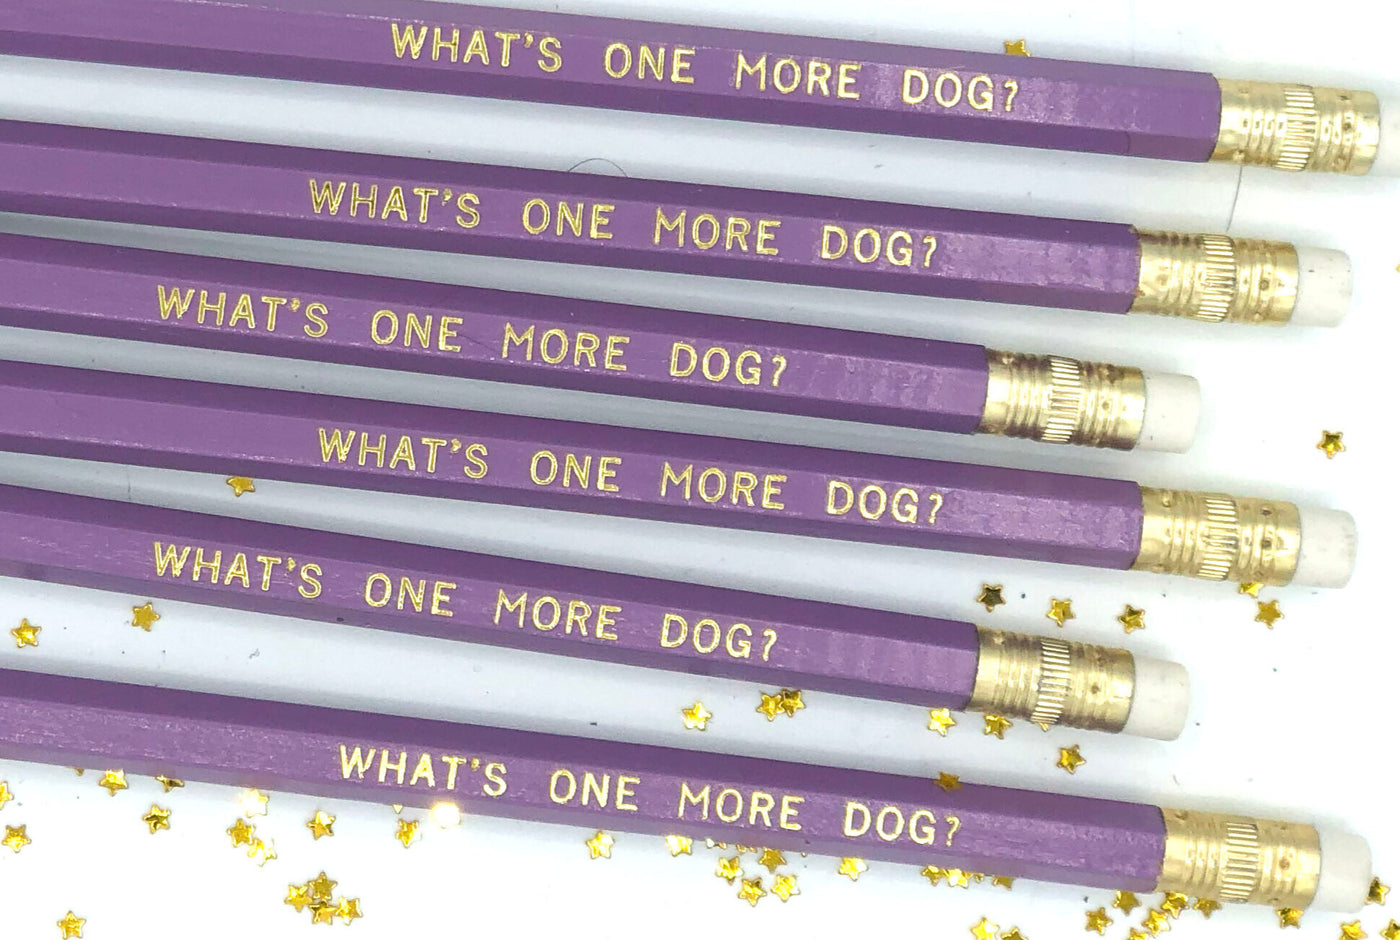 What's One More Dog? - The Dog Person Pencil